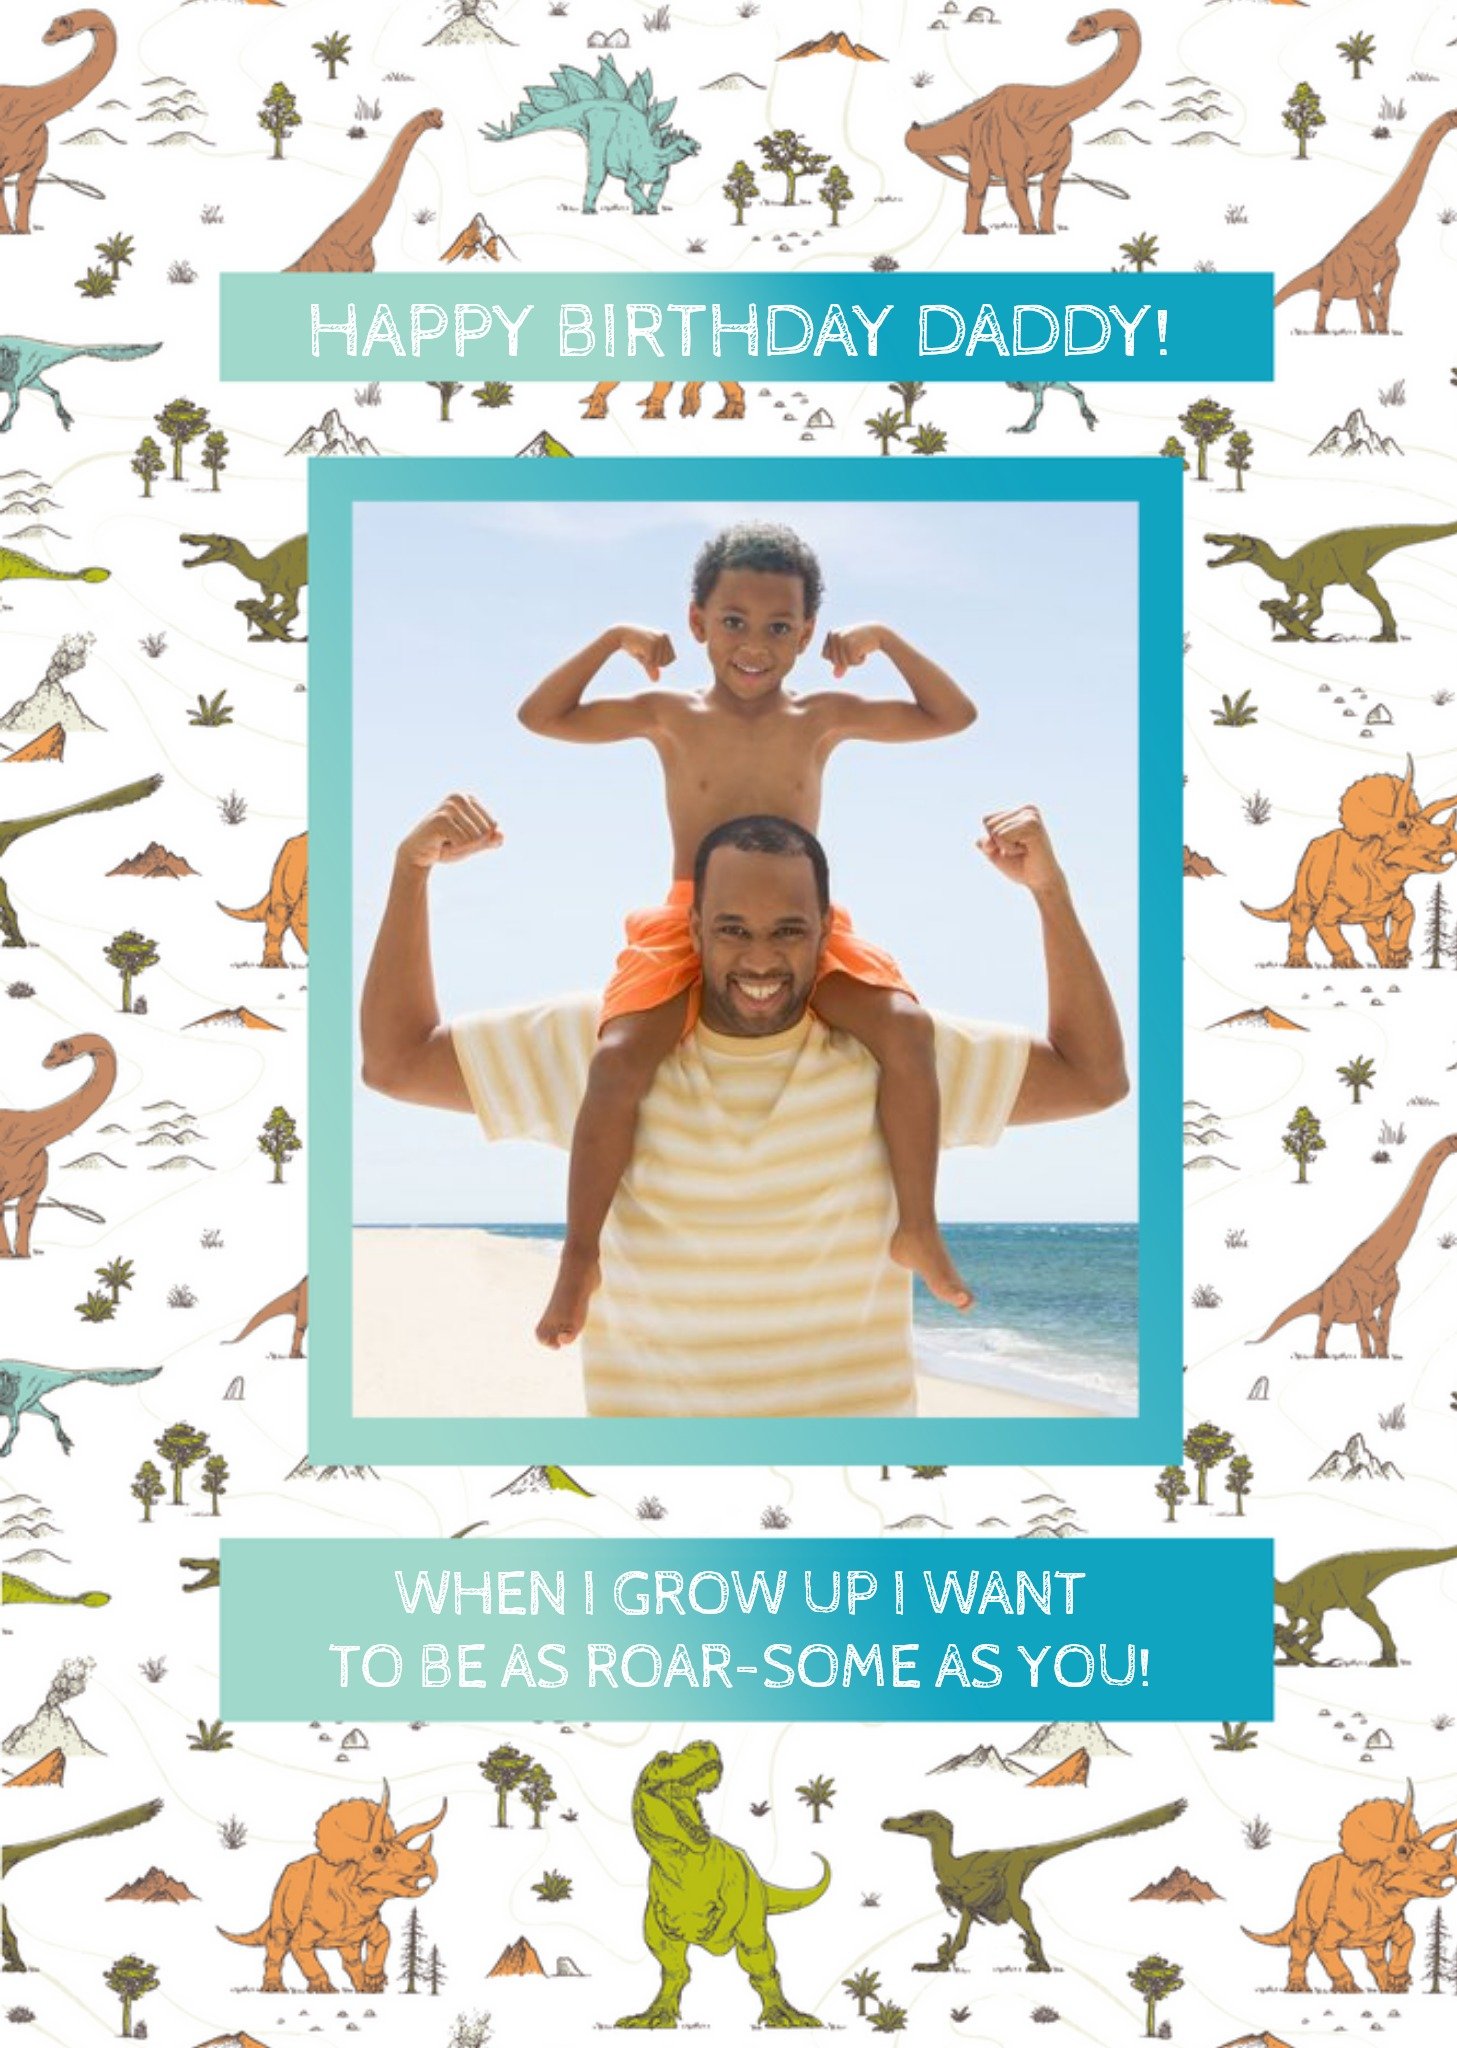 The Natural History Museum Daddy Birthday Card - Dinosaur Birthday Photo Upload Card, Large